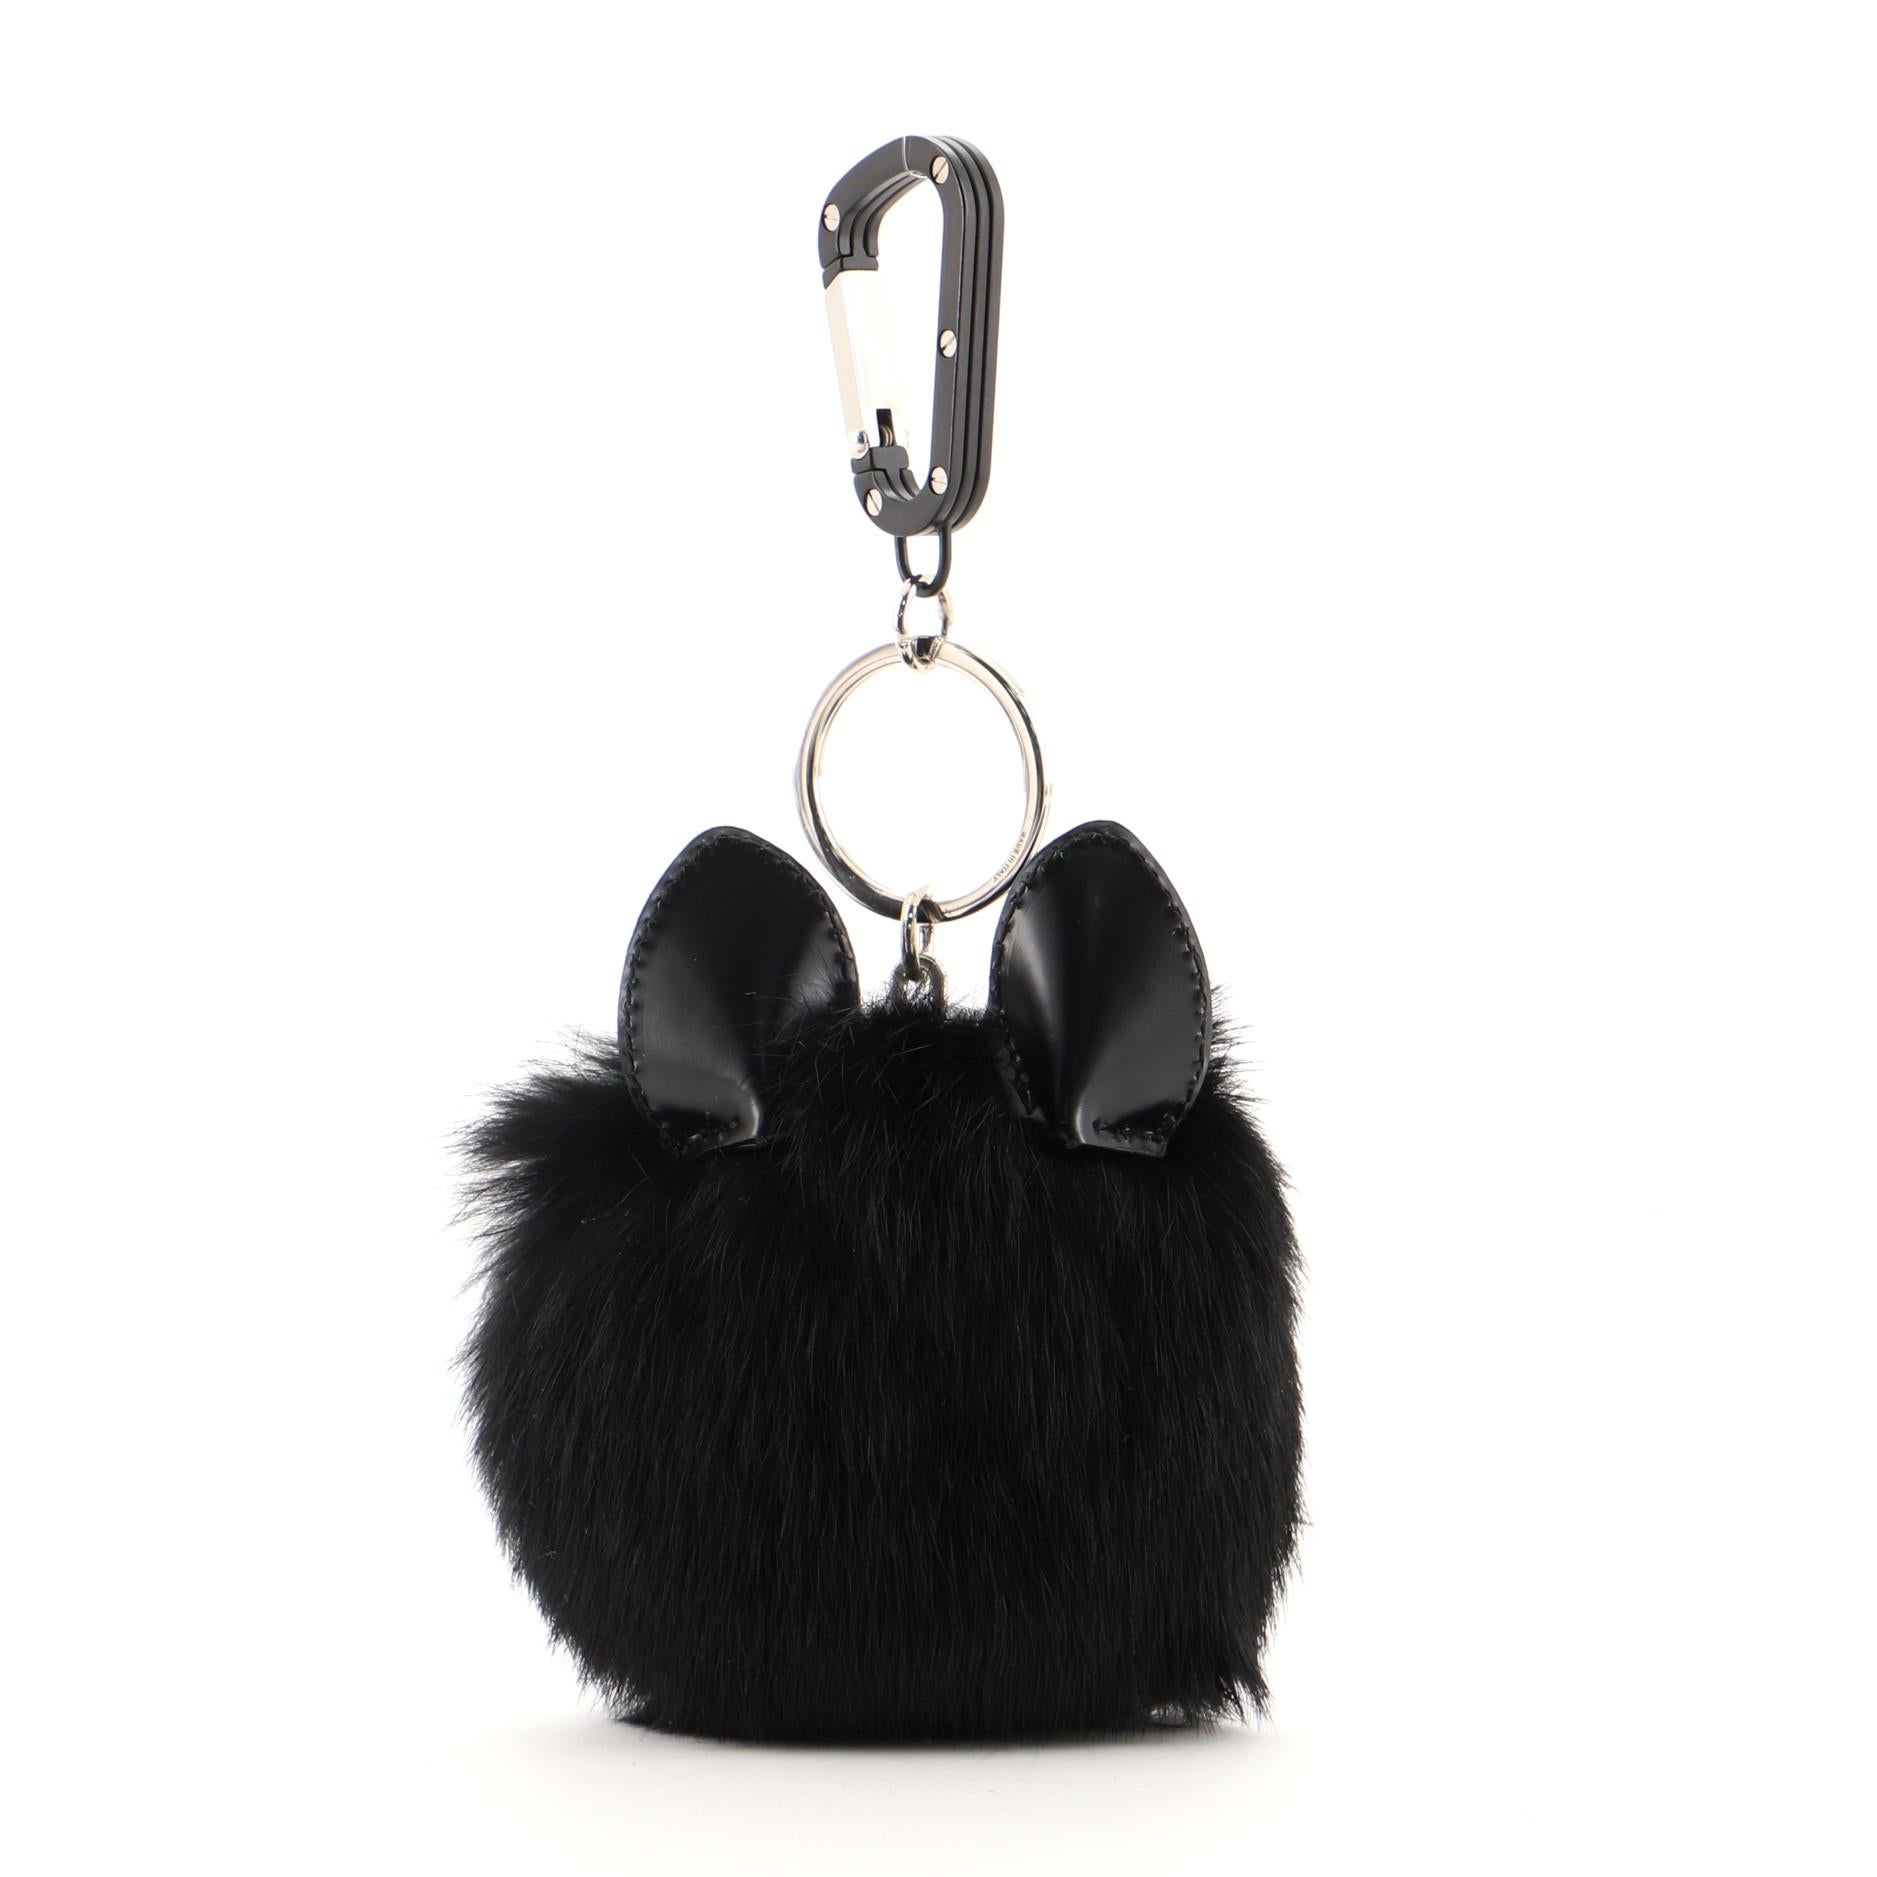 Christian Dior Cookie Bag Charm Leather and Fur
Black

Condition Details: Light scuffs and indentations on leather trims, scratches on hardware.

50962MSC

Height None